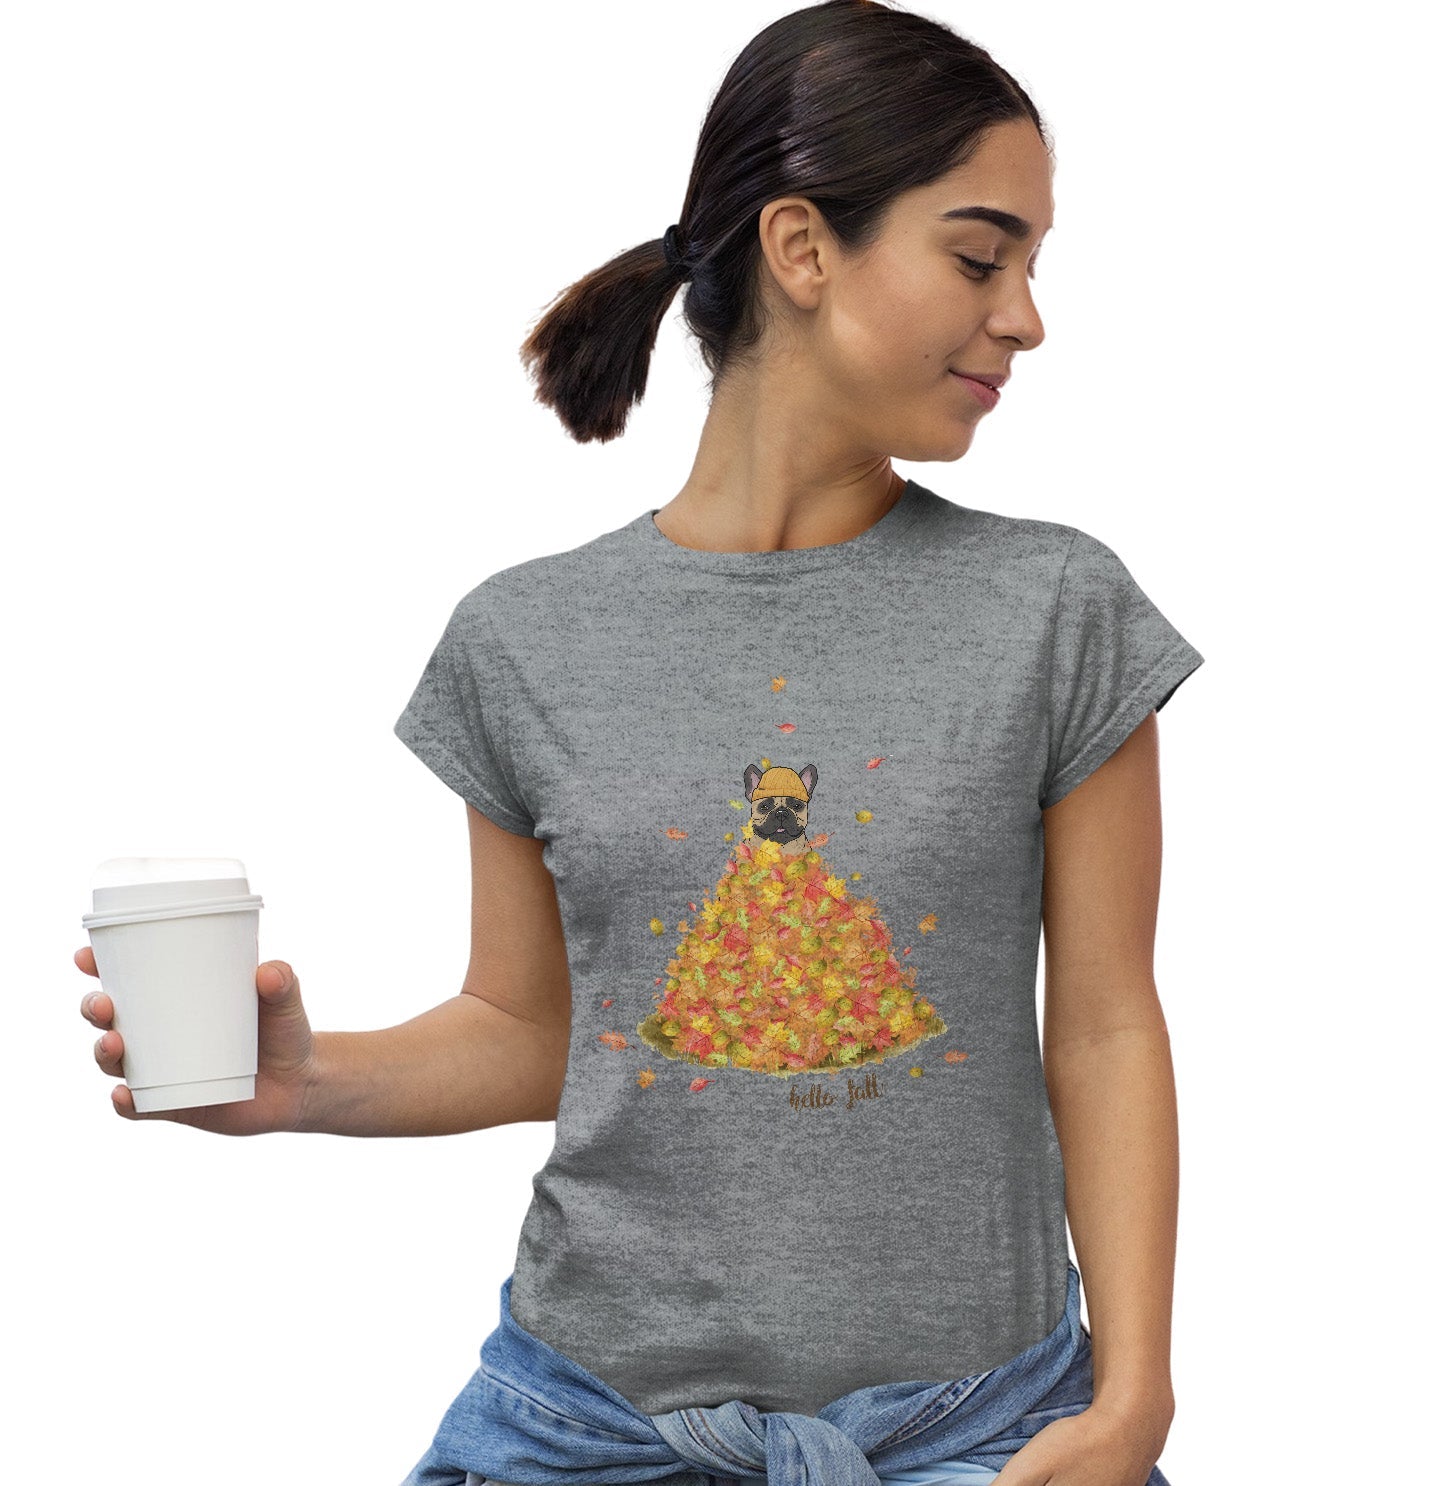 Leaf Pile and Frenchie - Women's Fitted T-Shirt